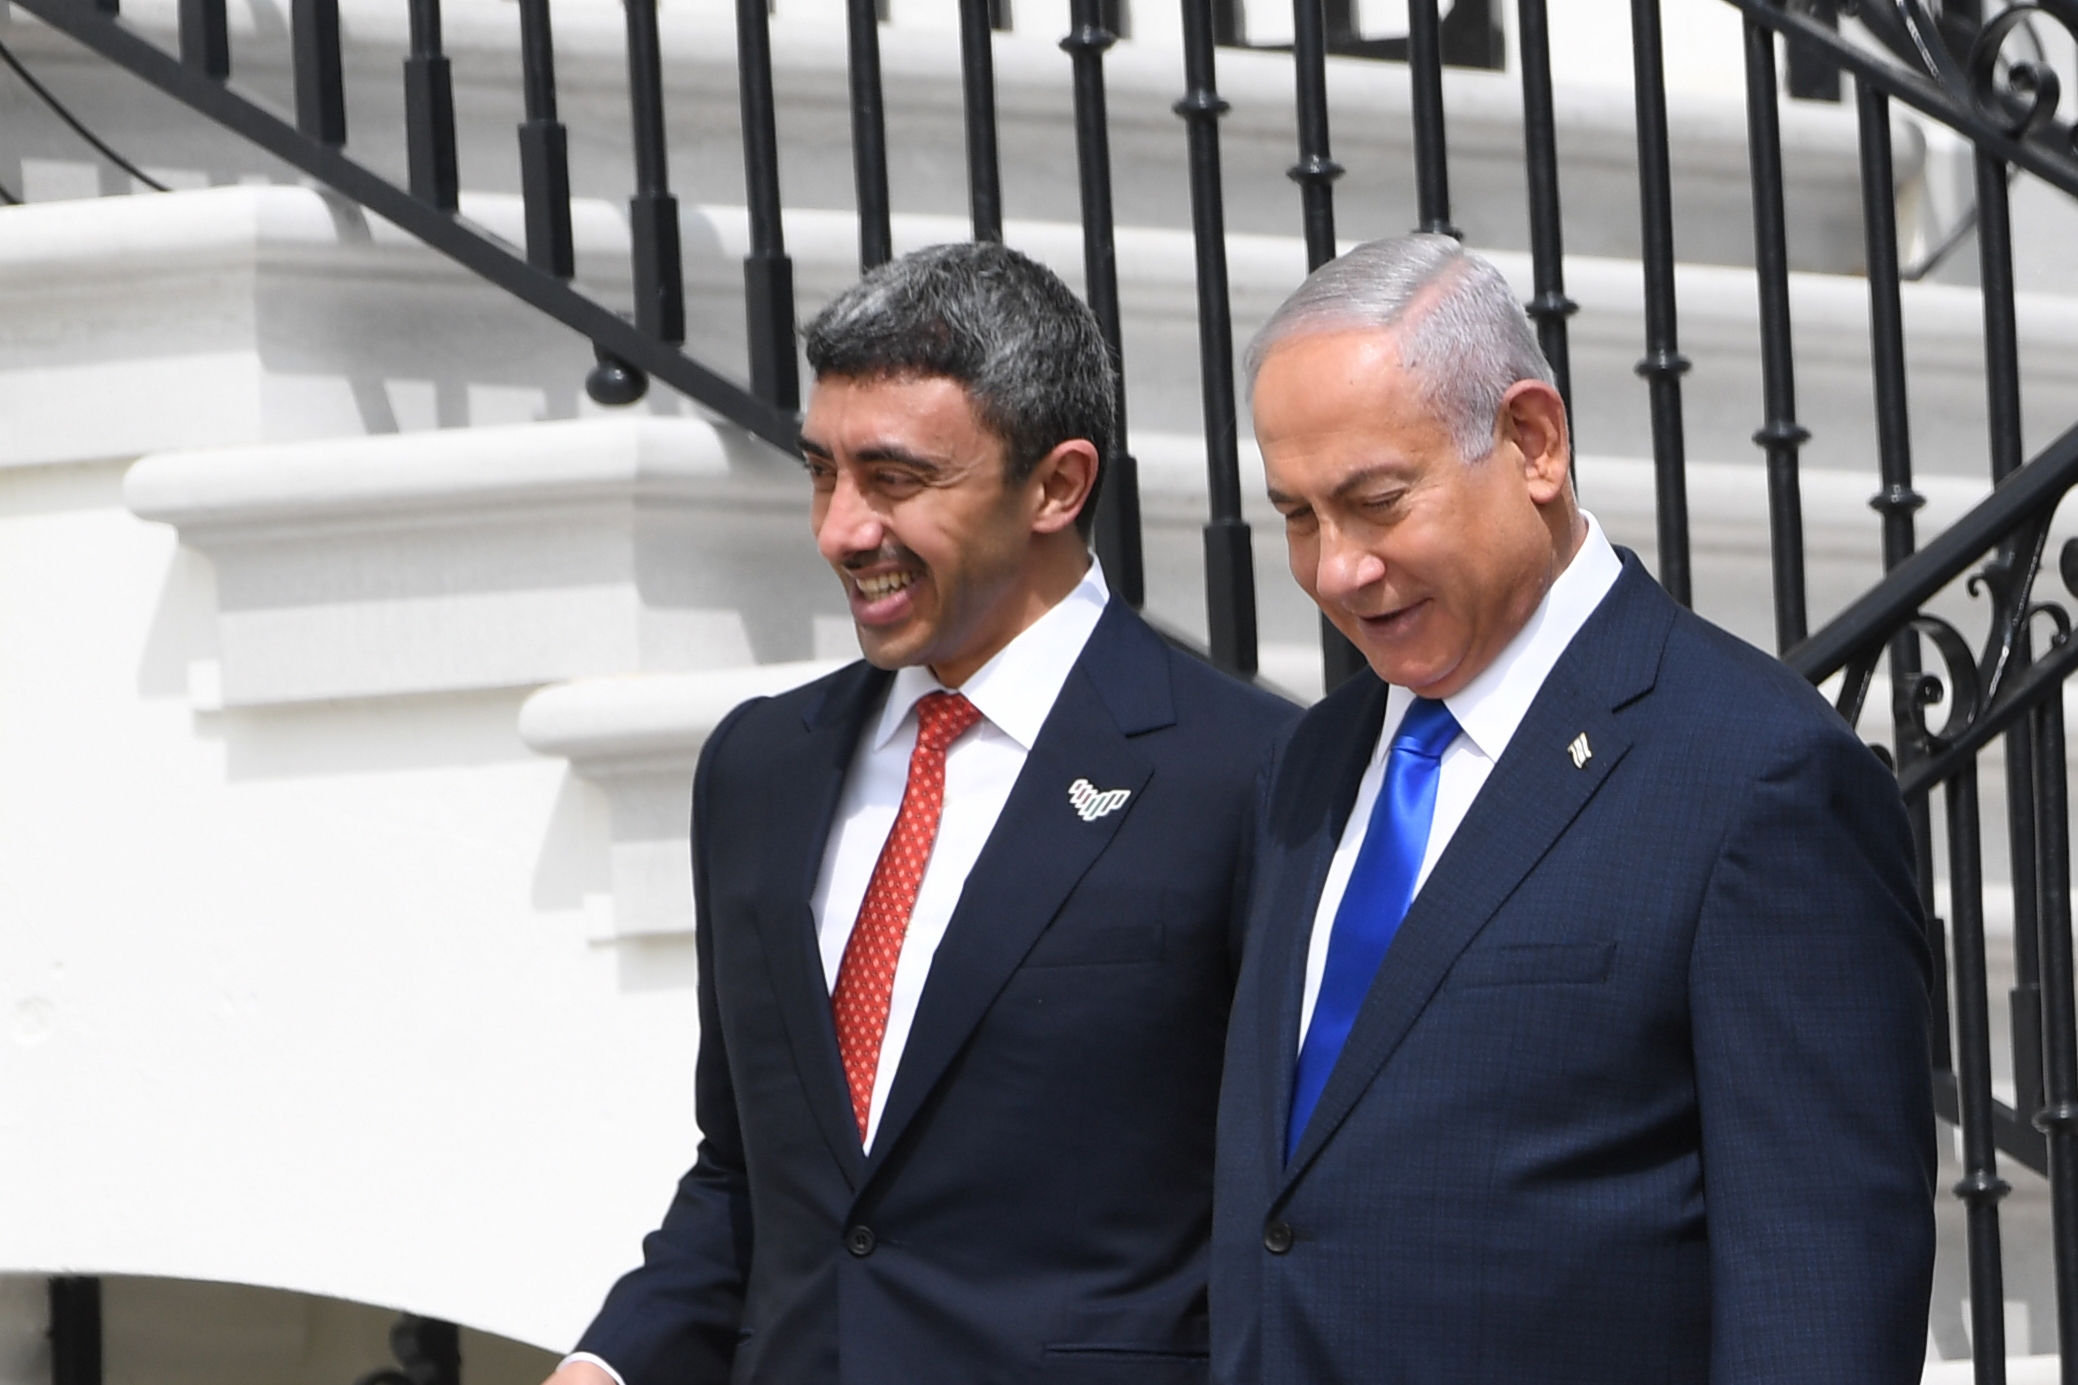 The UAE and Israel signed a US-brokered agreement to normalise ties in September during a ceremony at the White House.